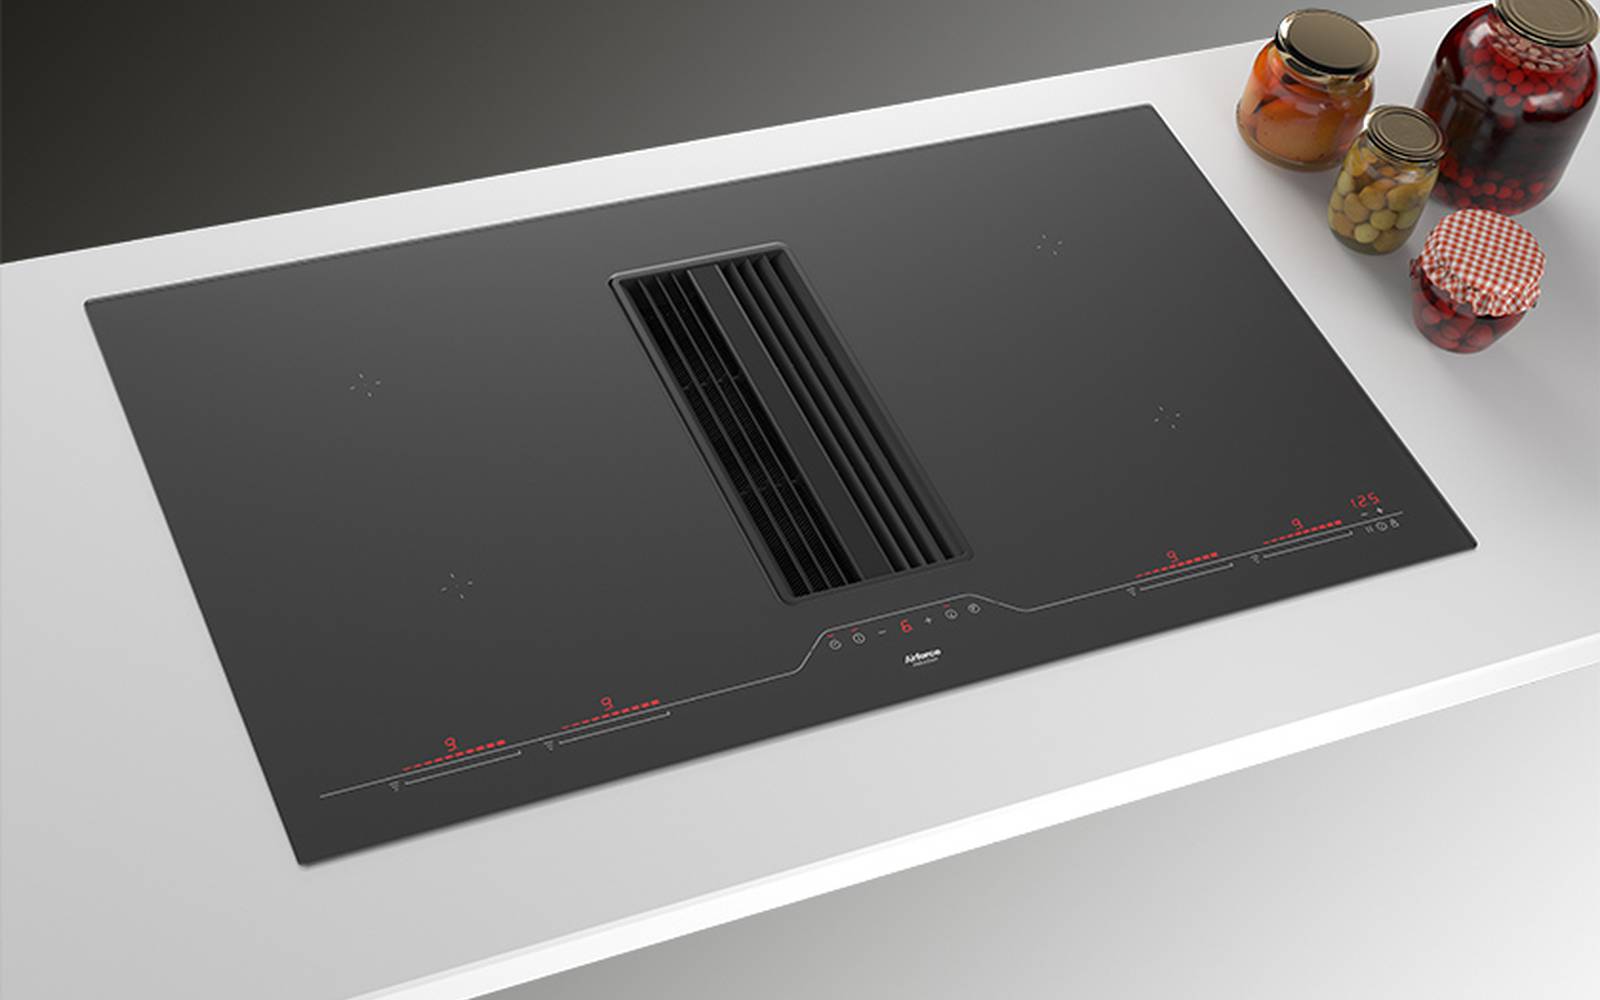 Airforce Aspira Centrale G5 On-Board 90cm Induction Hob with Downdraft Extractor - Black